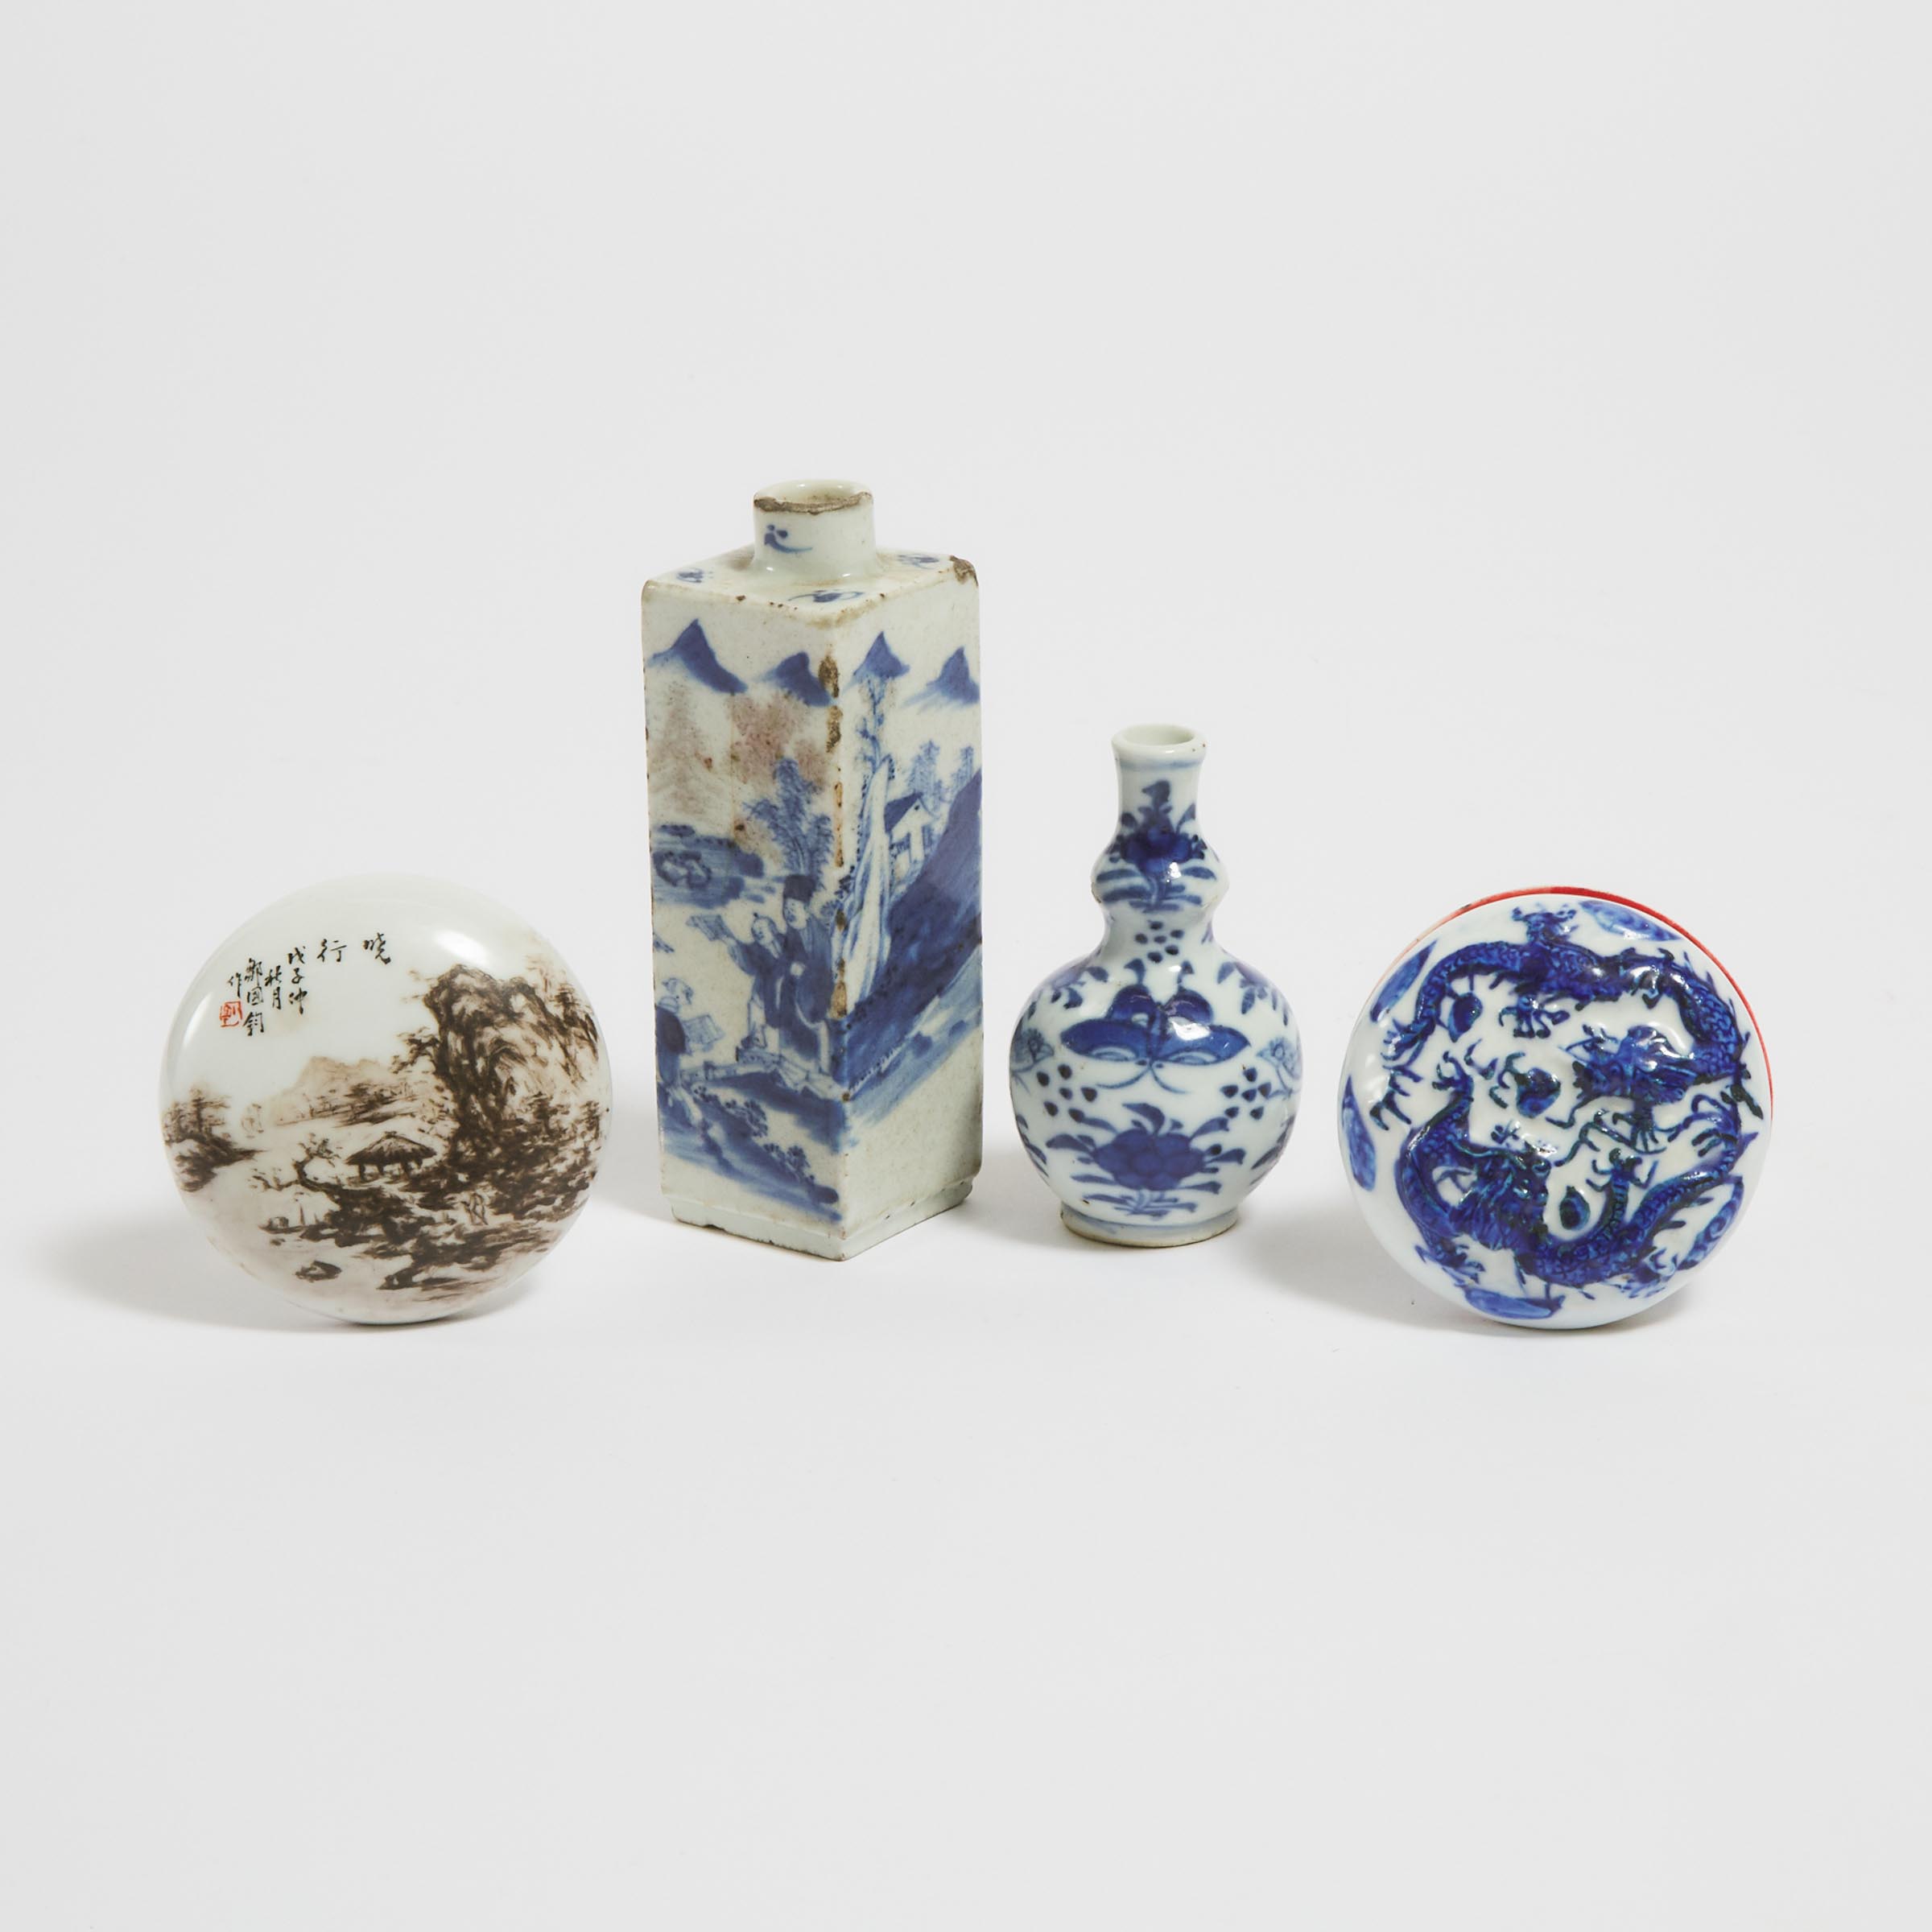 A Group of Four Small Porcelain Wares, 19th/20th Century